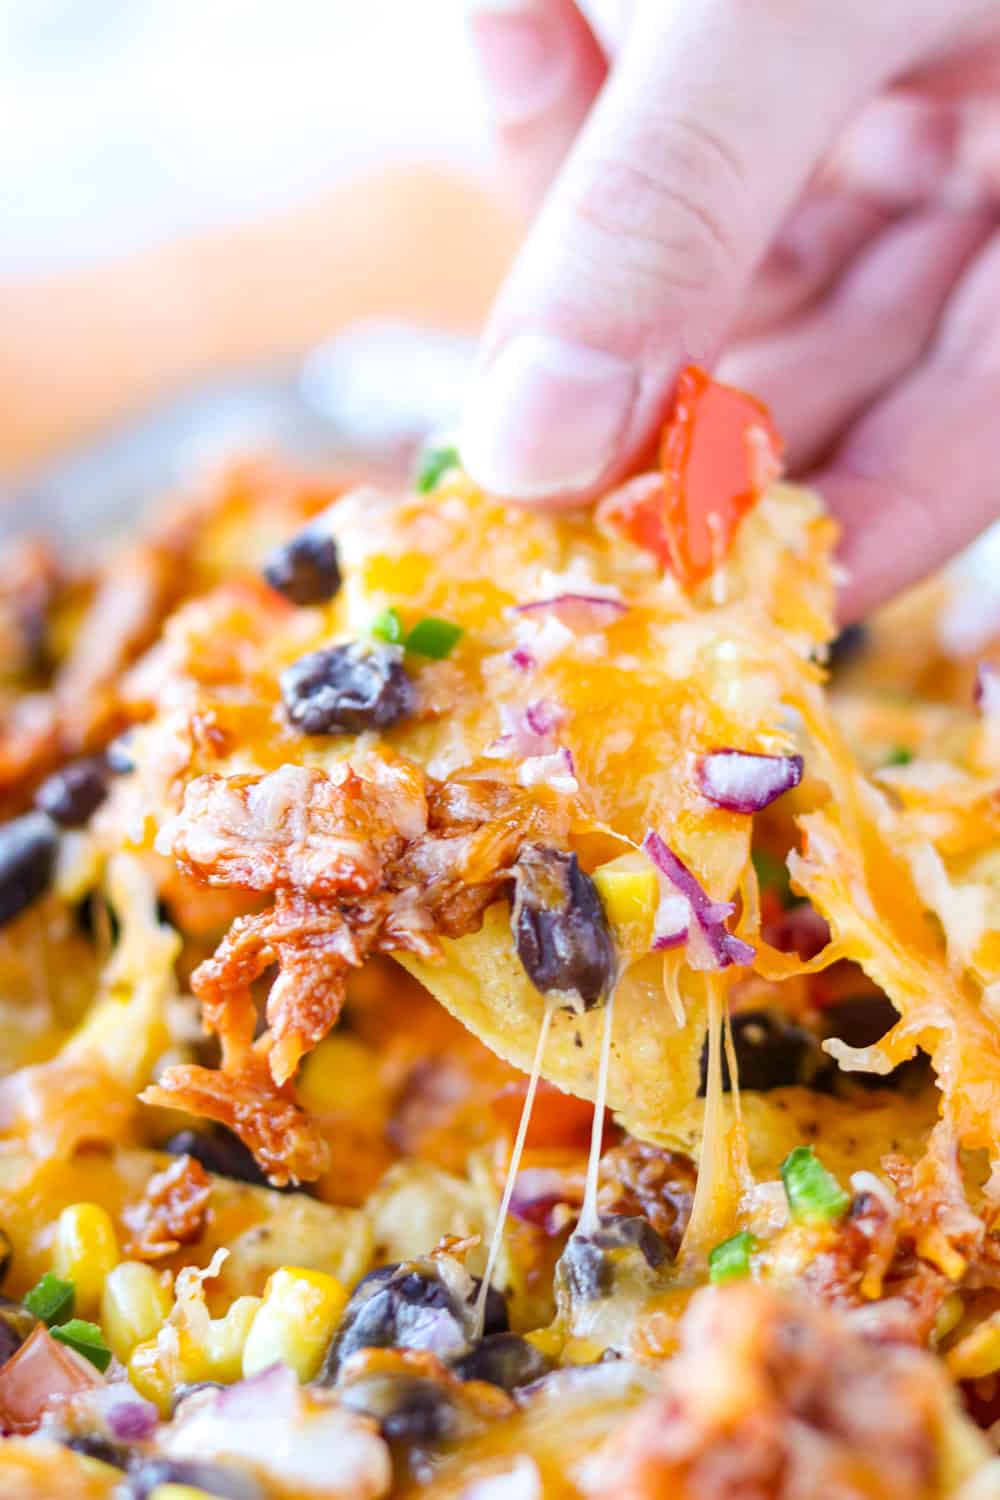 Easy BBQ Chicken Nachos Recipe - 365 Days of Baking and More